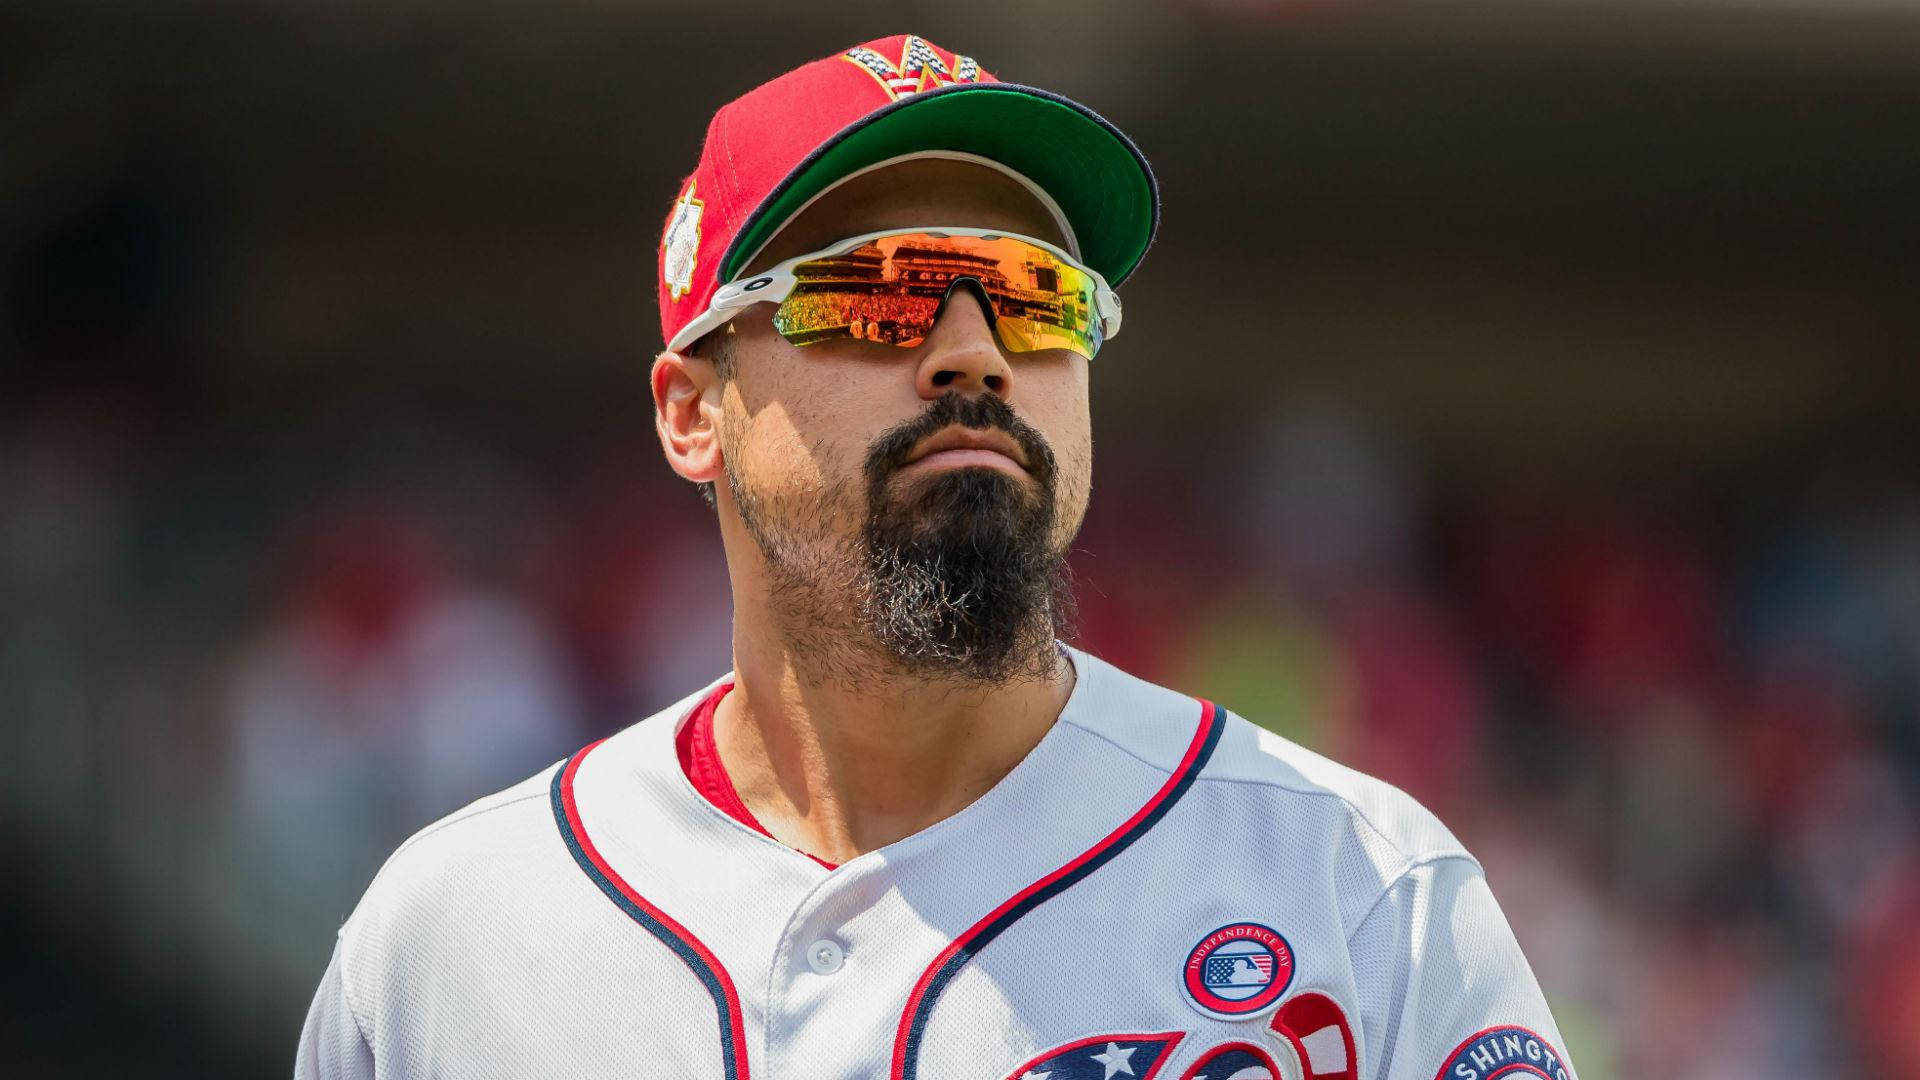 Anthony Rendon In Colorful Shades